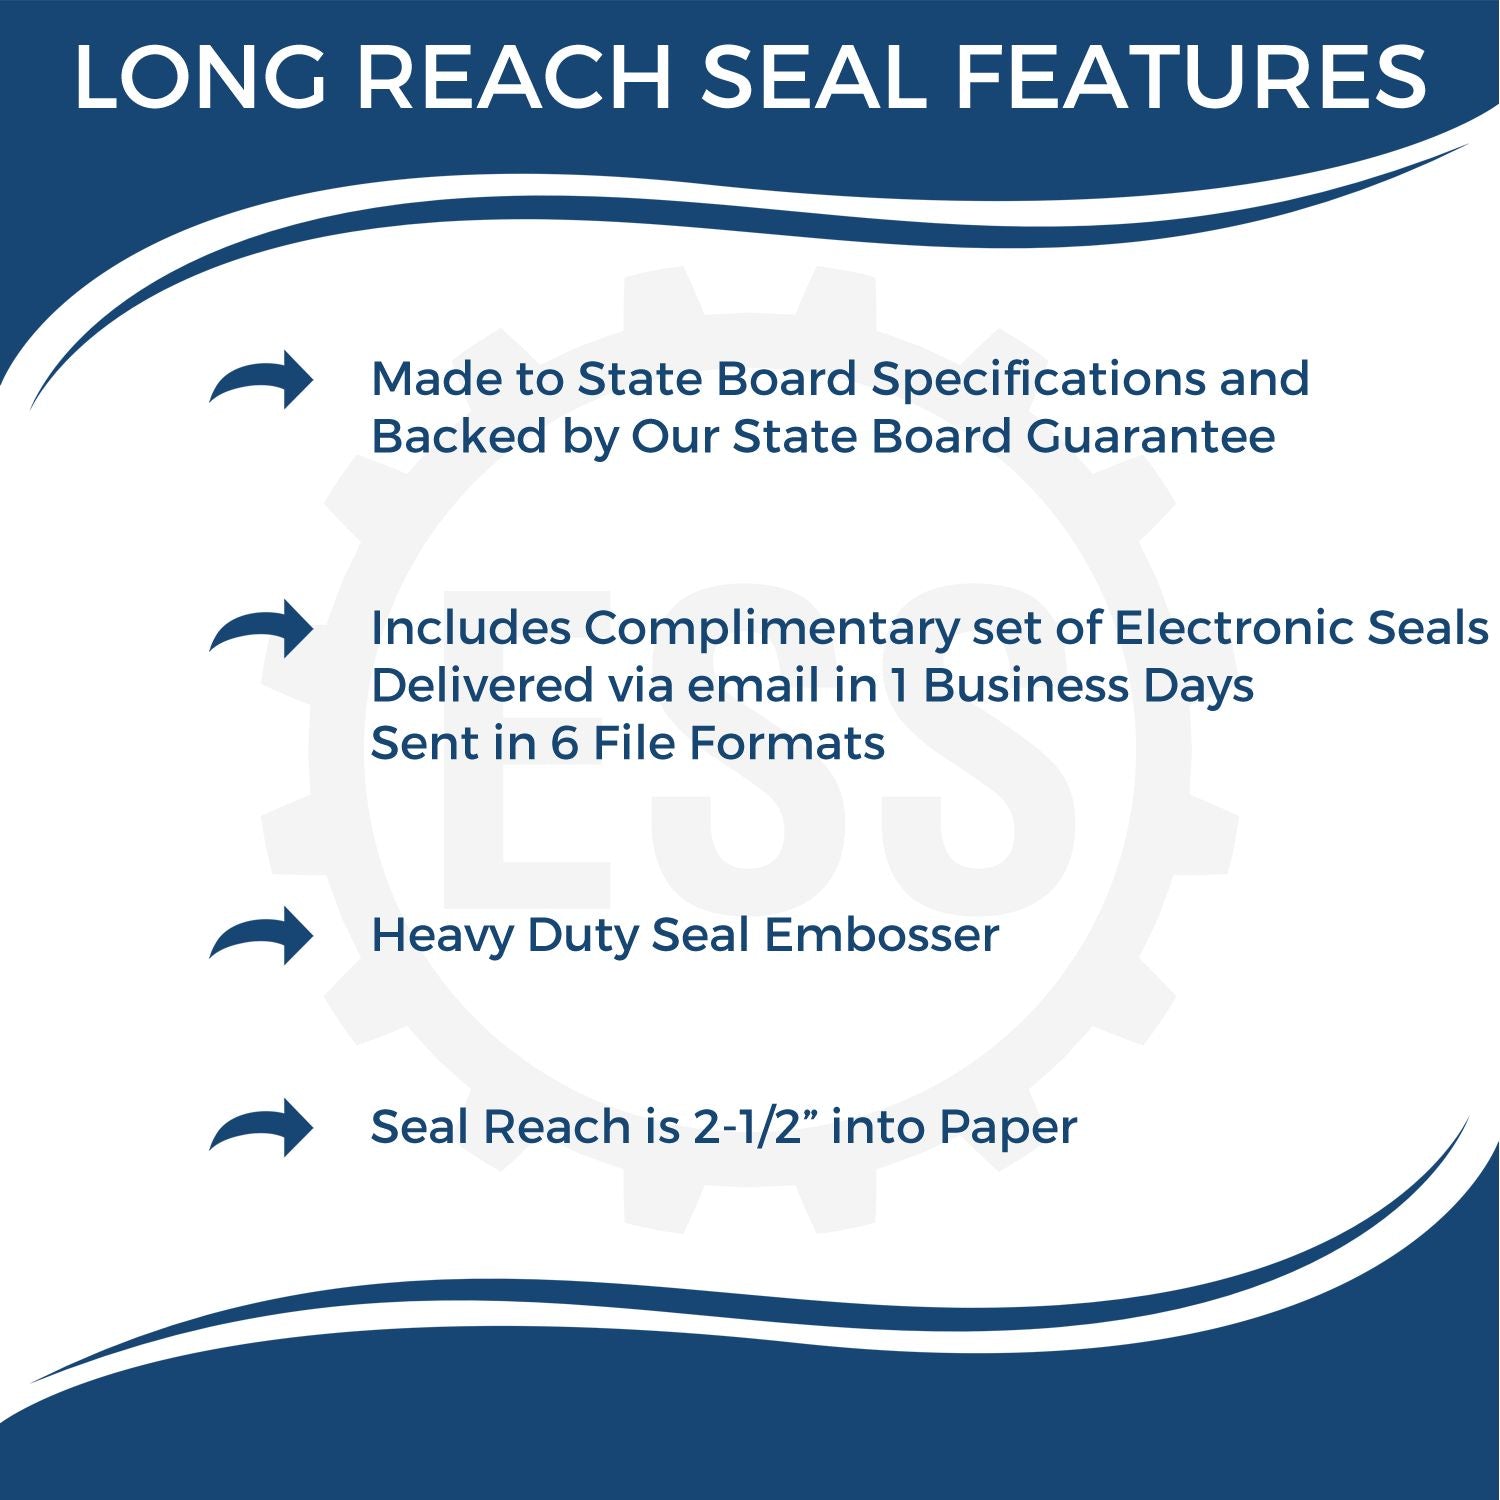 The main image for the Long Reach New York PE Seal depicting a sample of the imprint and electronic files